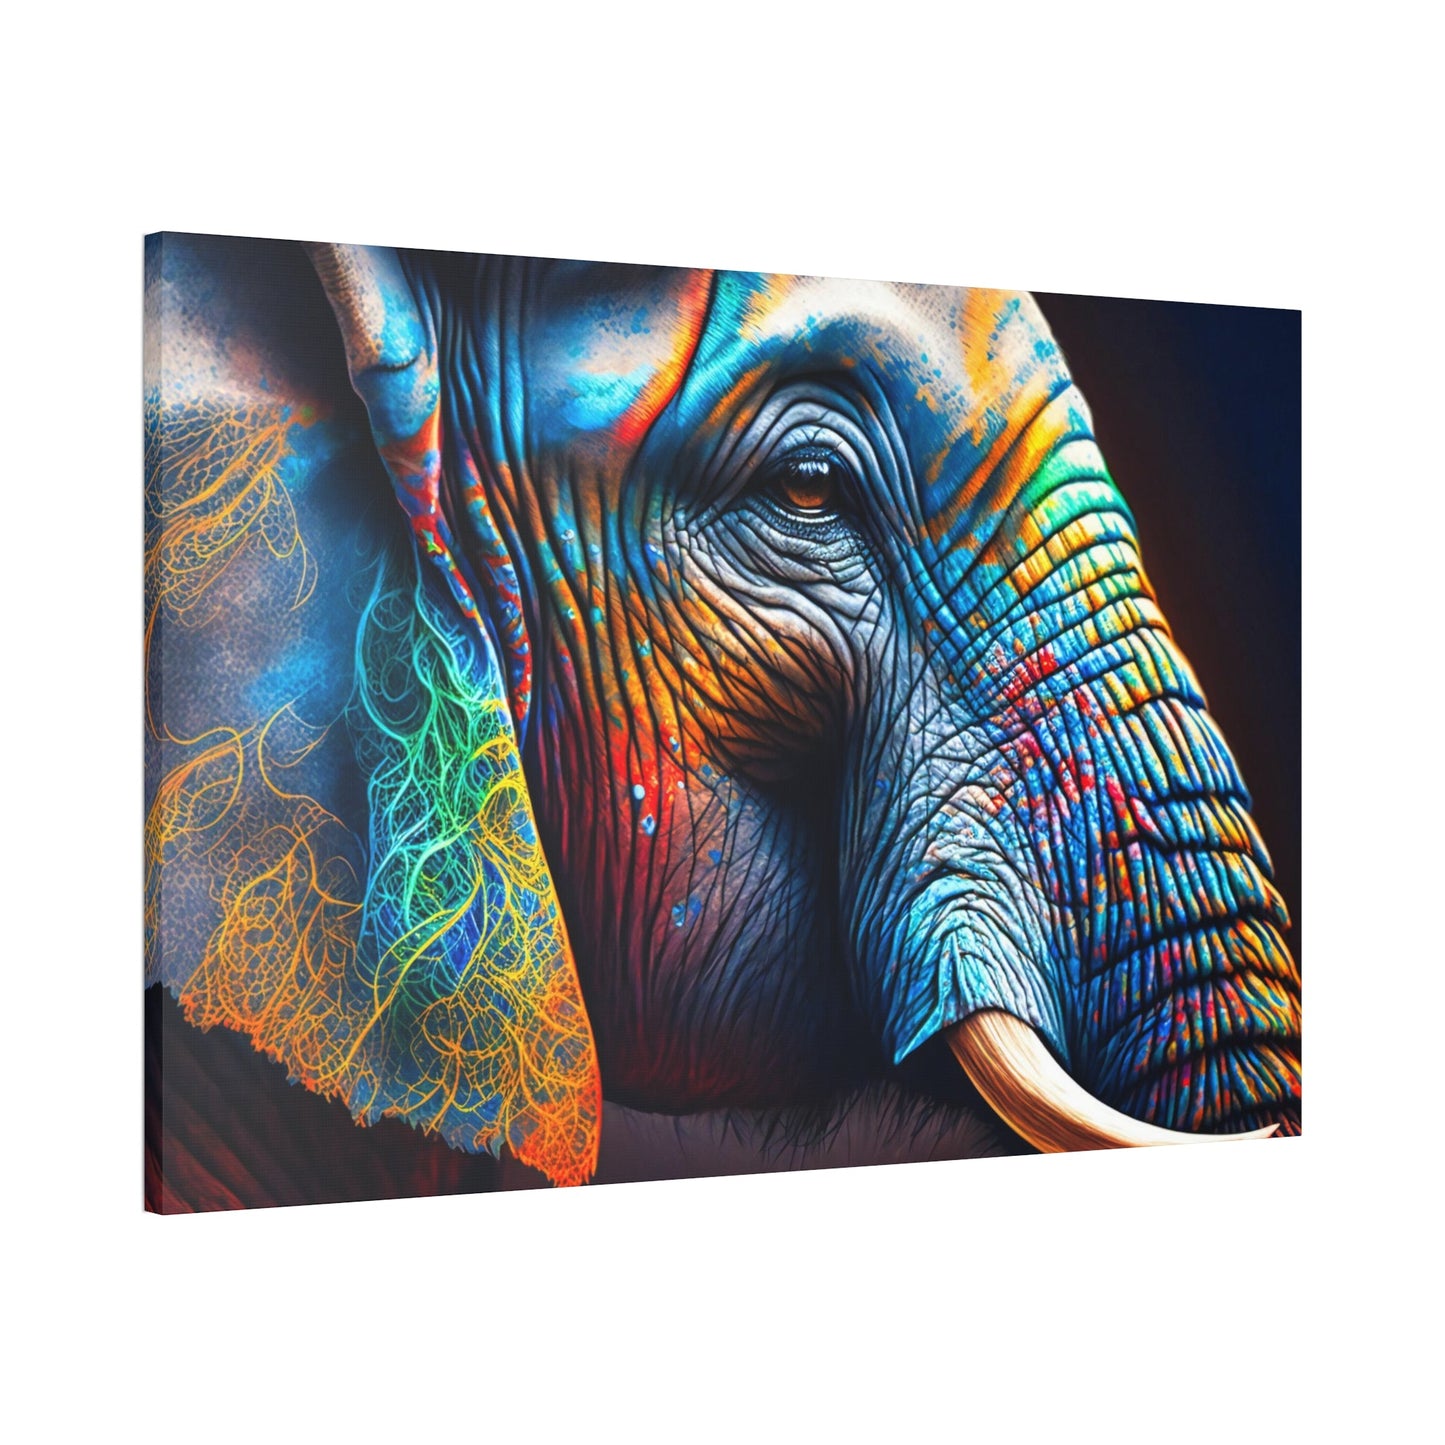 The Majestic Elephant: A Beautiful Canvas Artwork in Detail